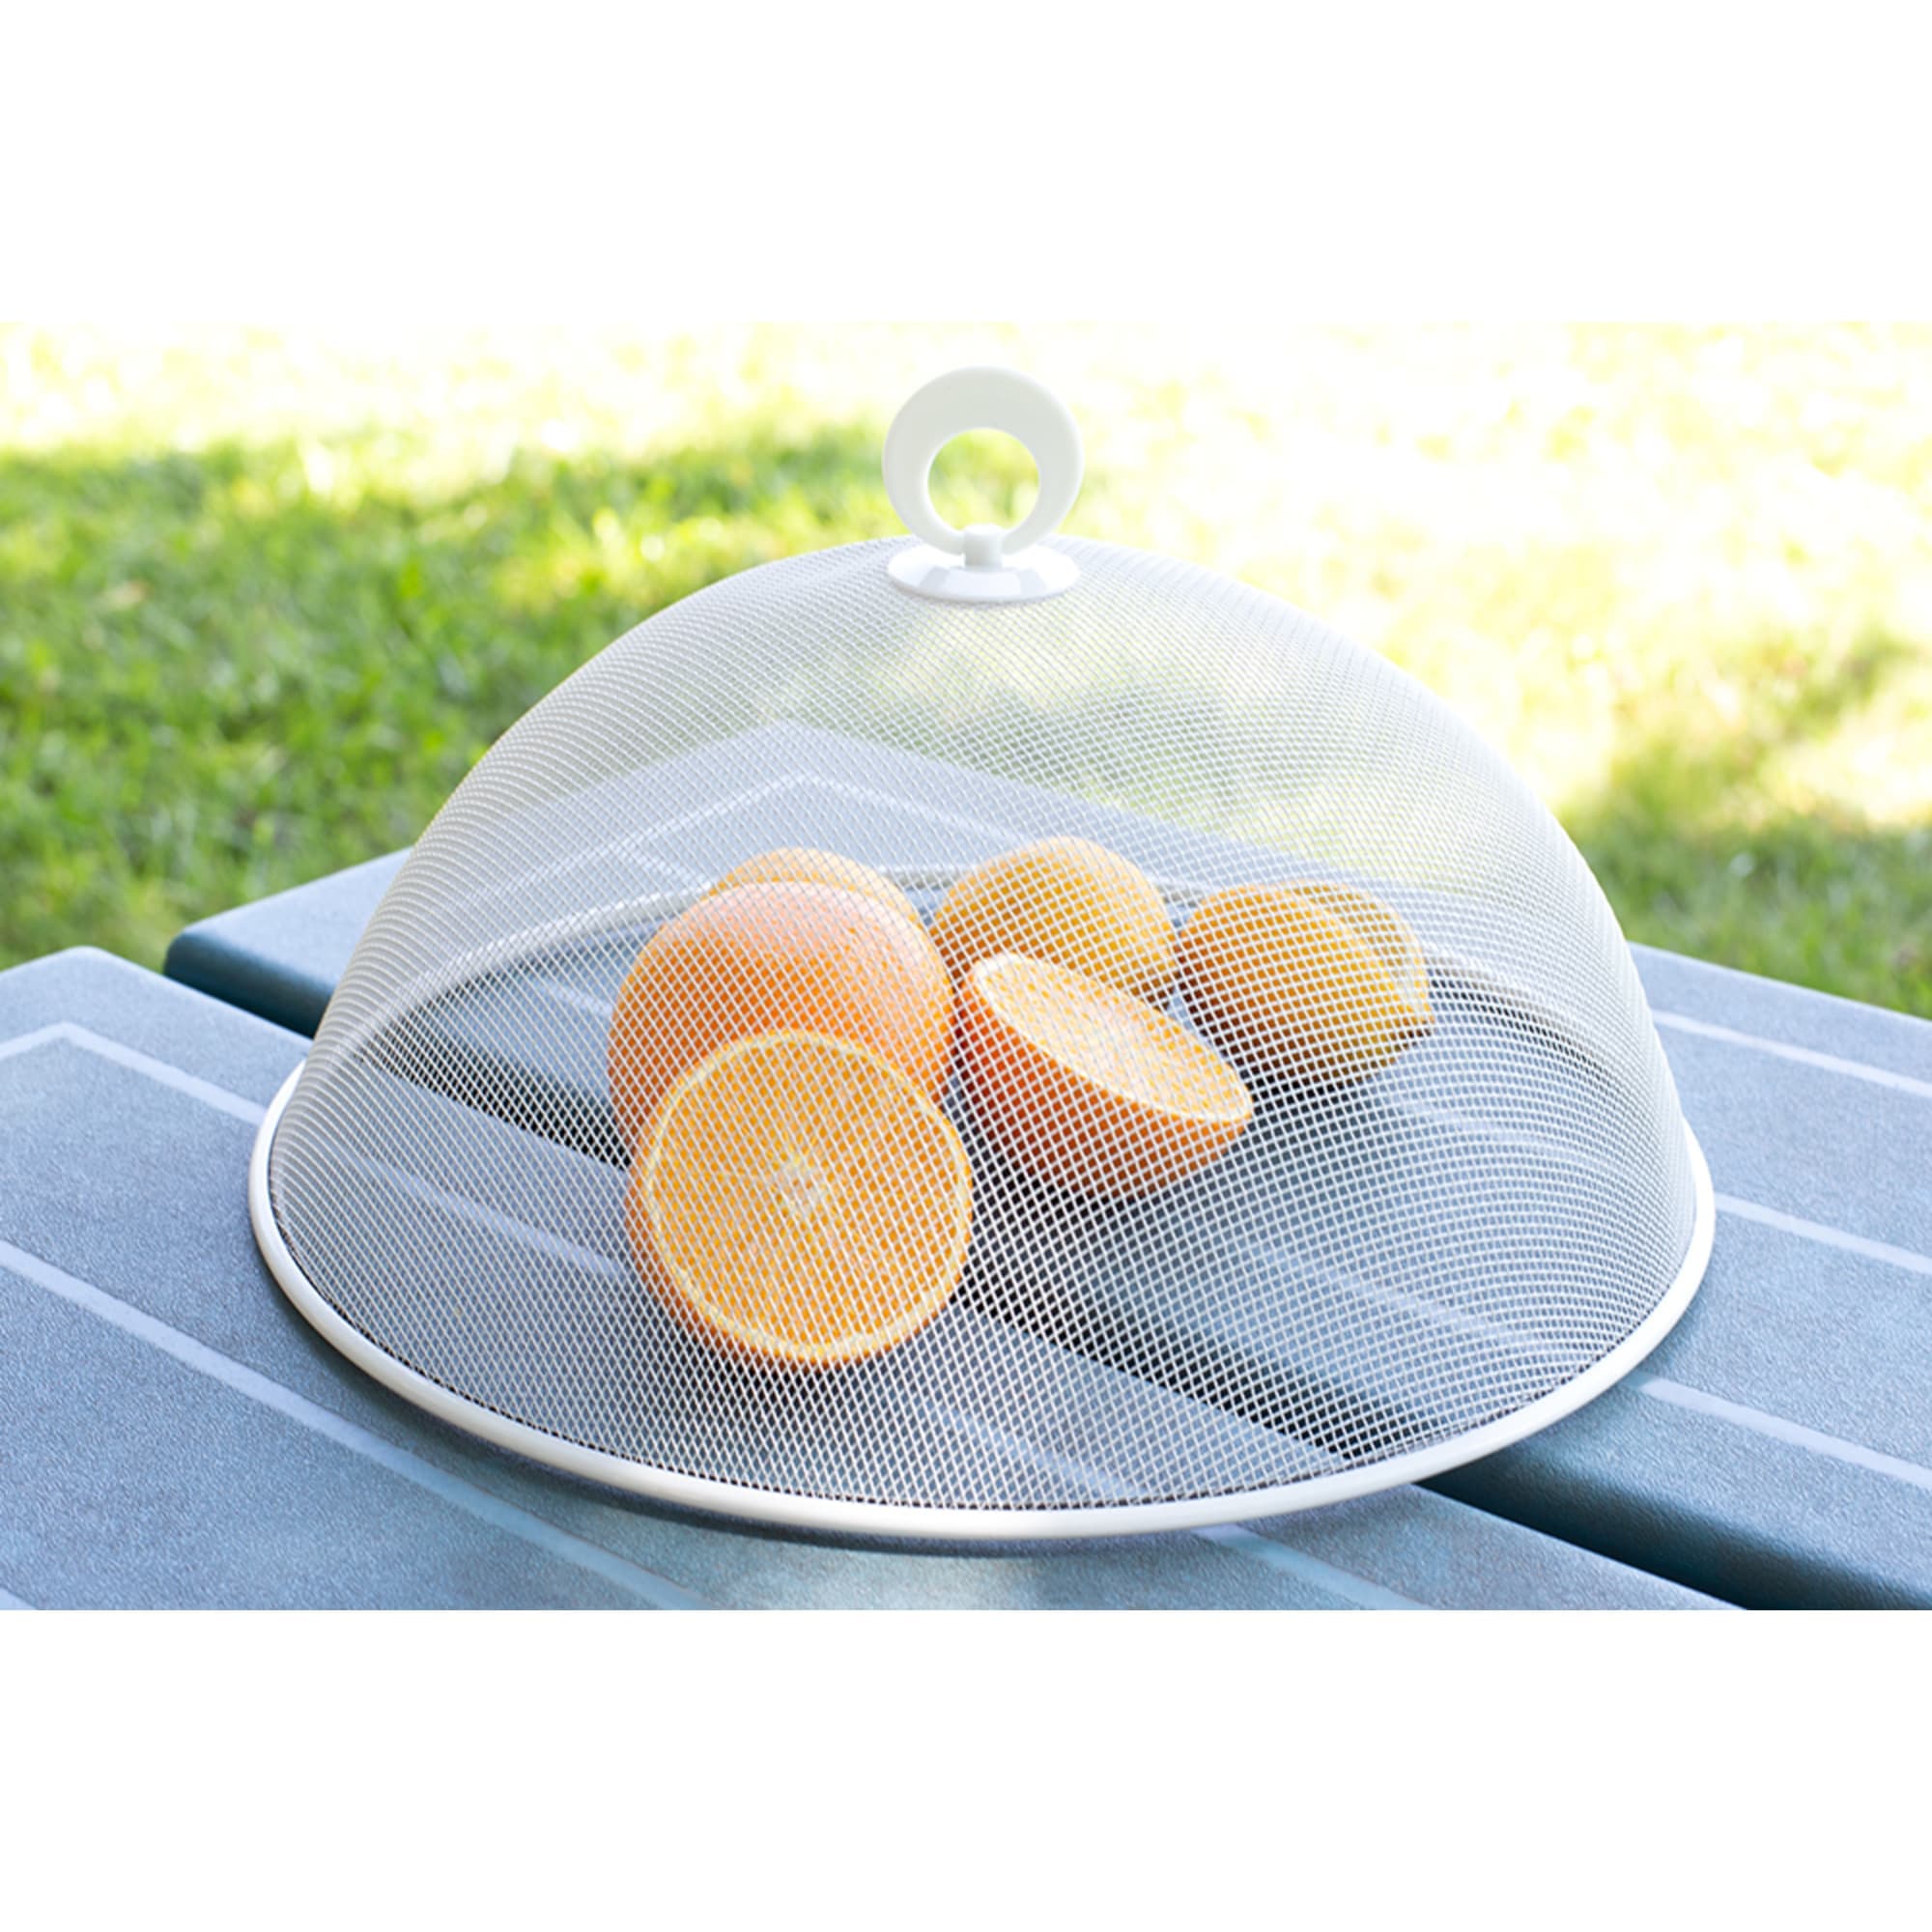 Home Basics Round Mesh Metal Food Plate Cover, White $2.00 EACH, CASE PACK OF 24